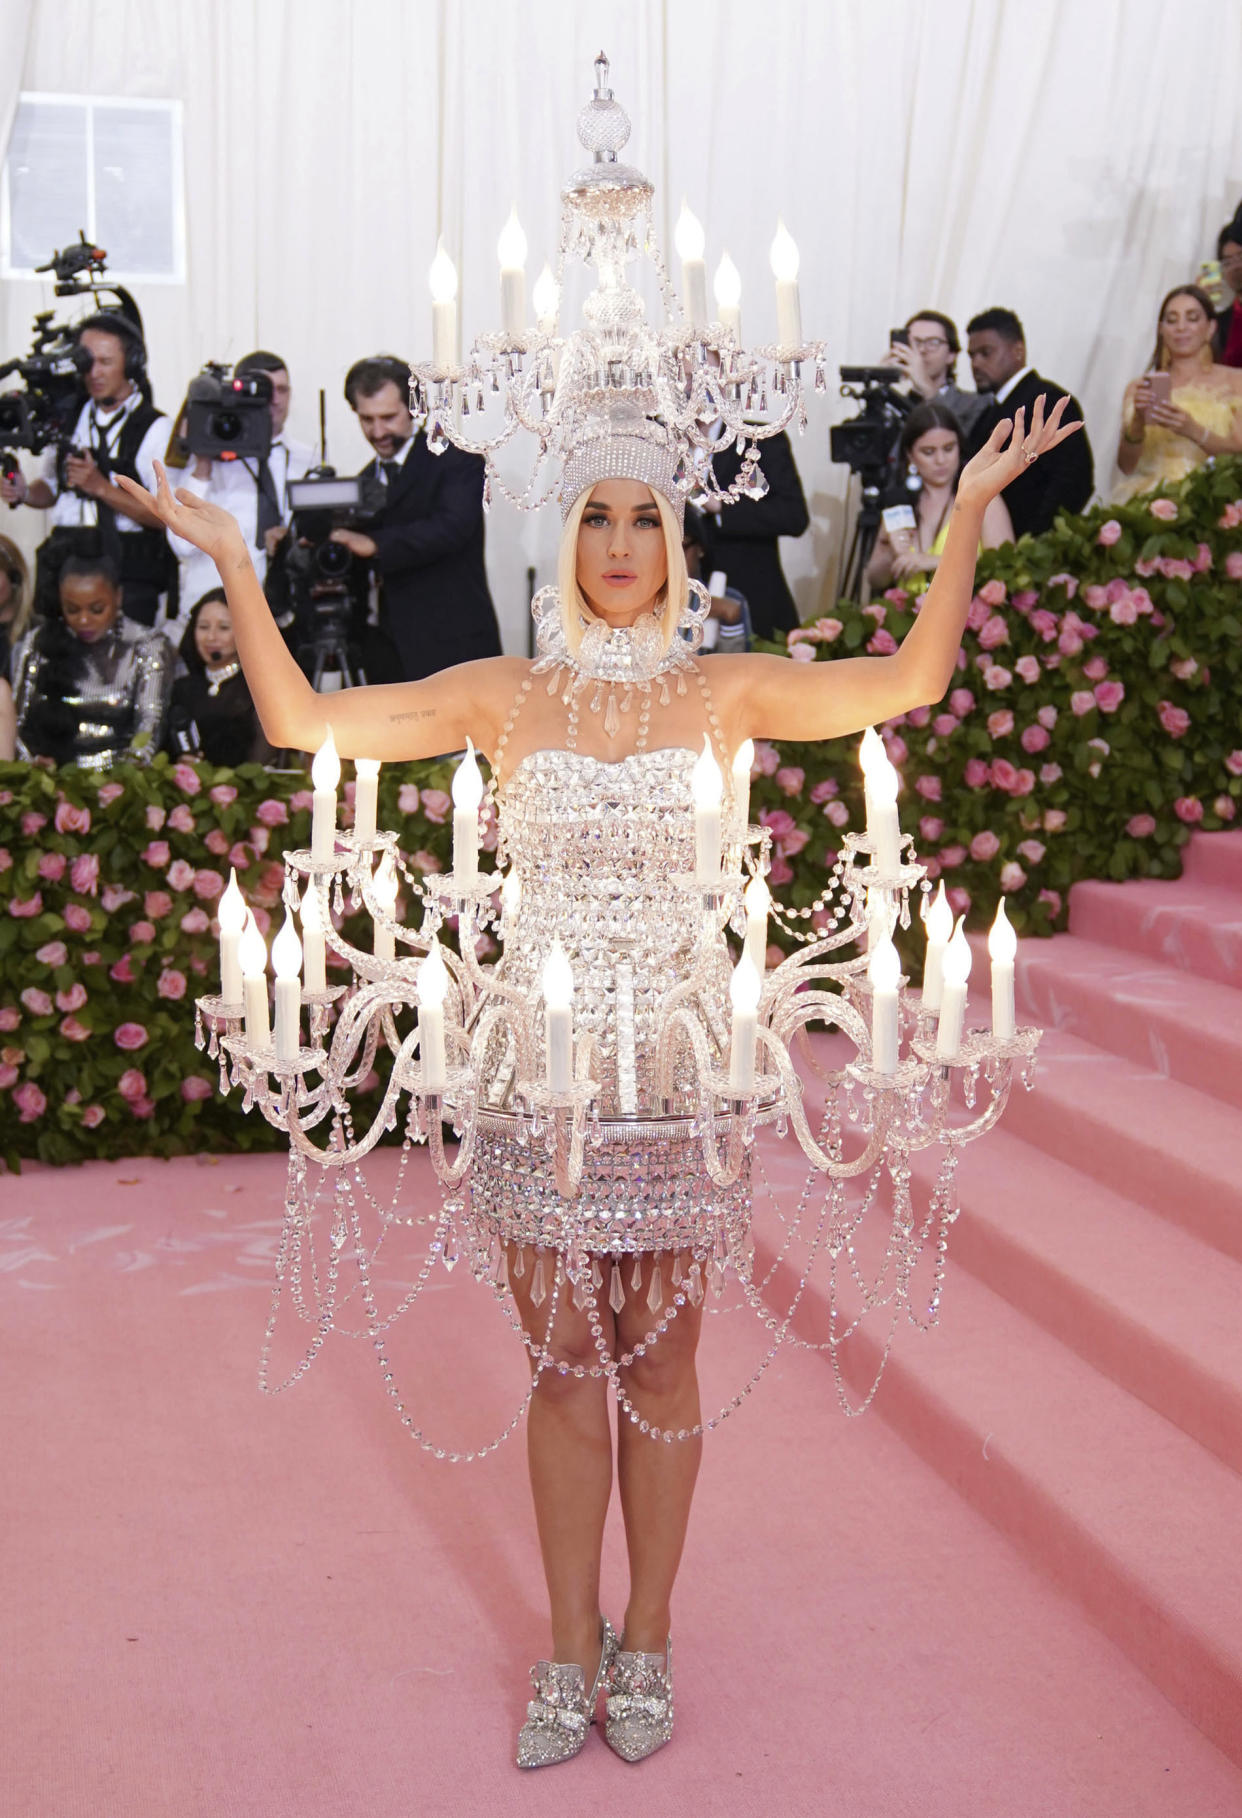 Perry at the 2019 Met Gala in a chandelier mini dress created by Moschino’s Jeremy Scott, a friend and longtime collaborator of the star. - Credit: zz/Elaine Wells/STAR MAX/IPx